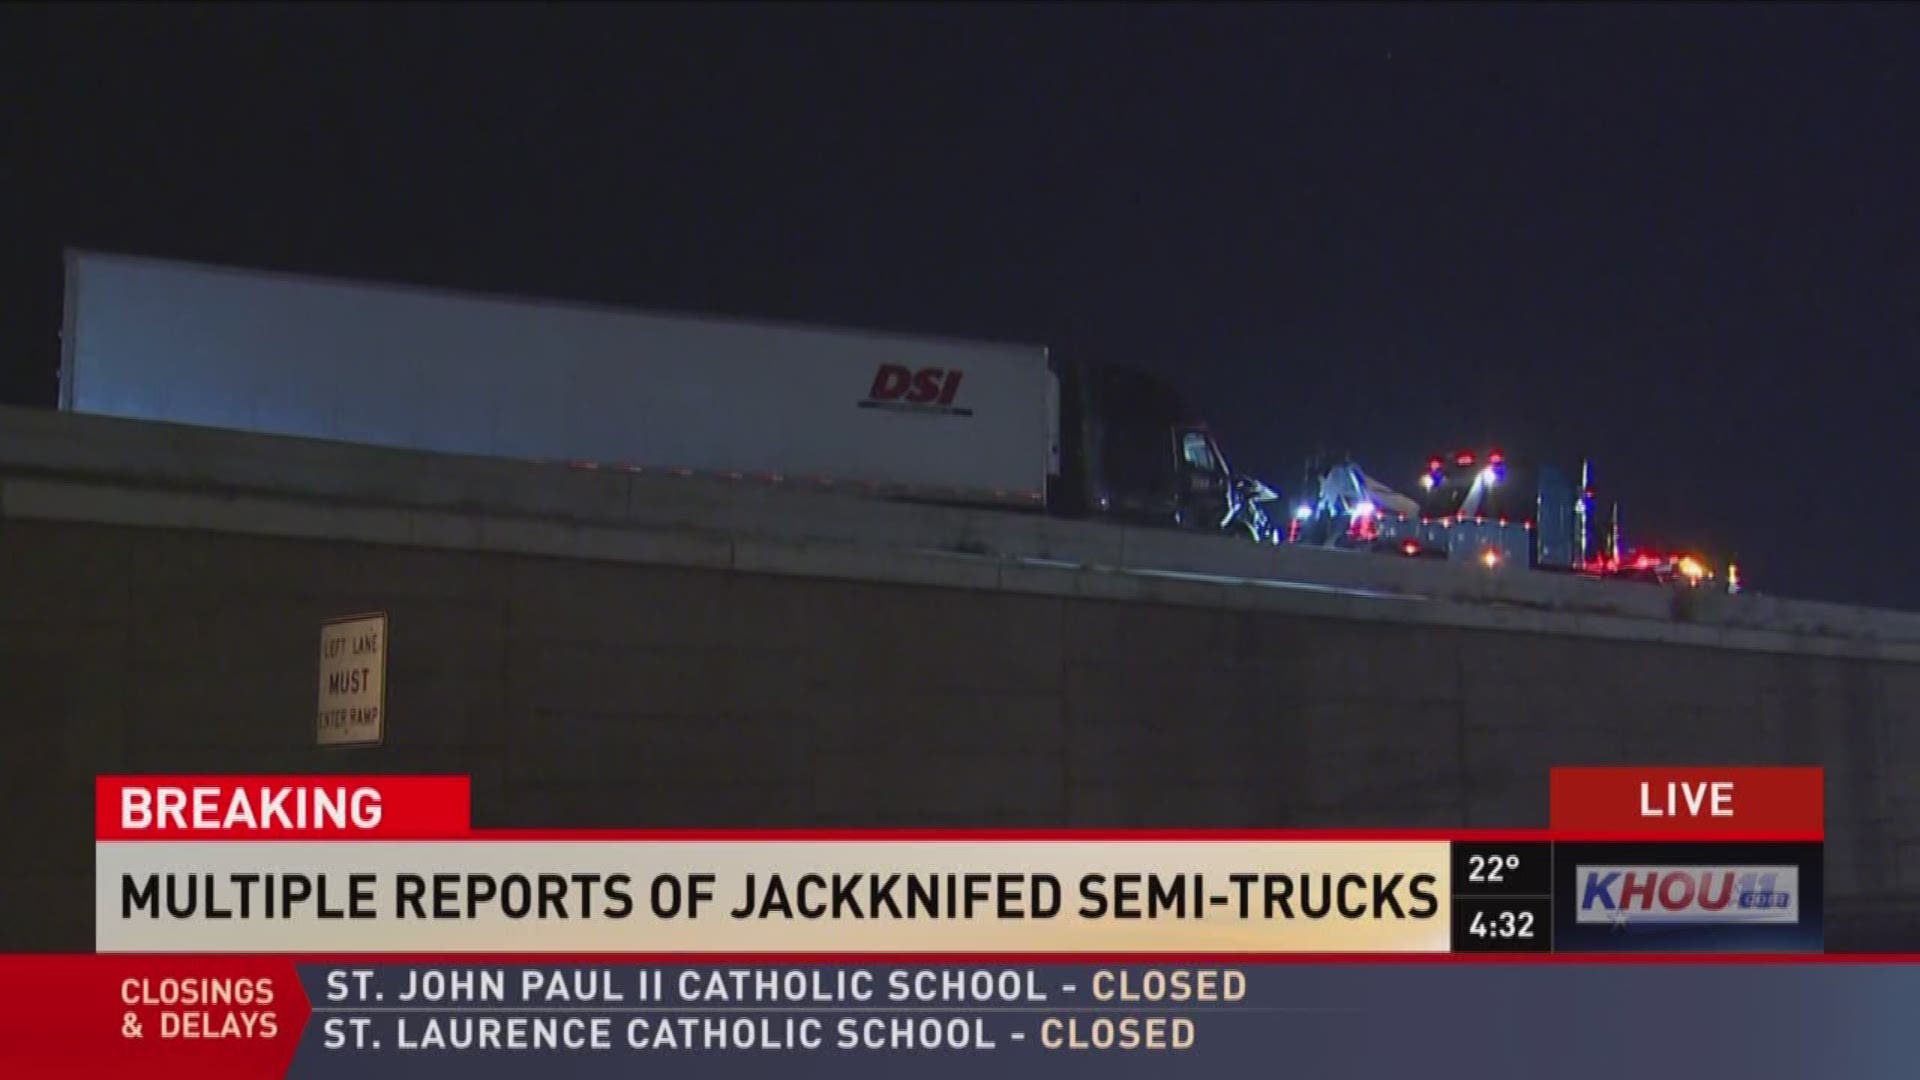 Several 18-wheelers were stuck on overpasses on the North Freeway after they jackknifed when they hit patches of ice on overpasses.